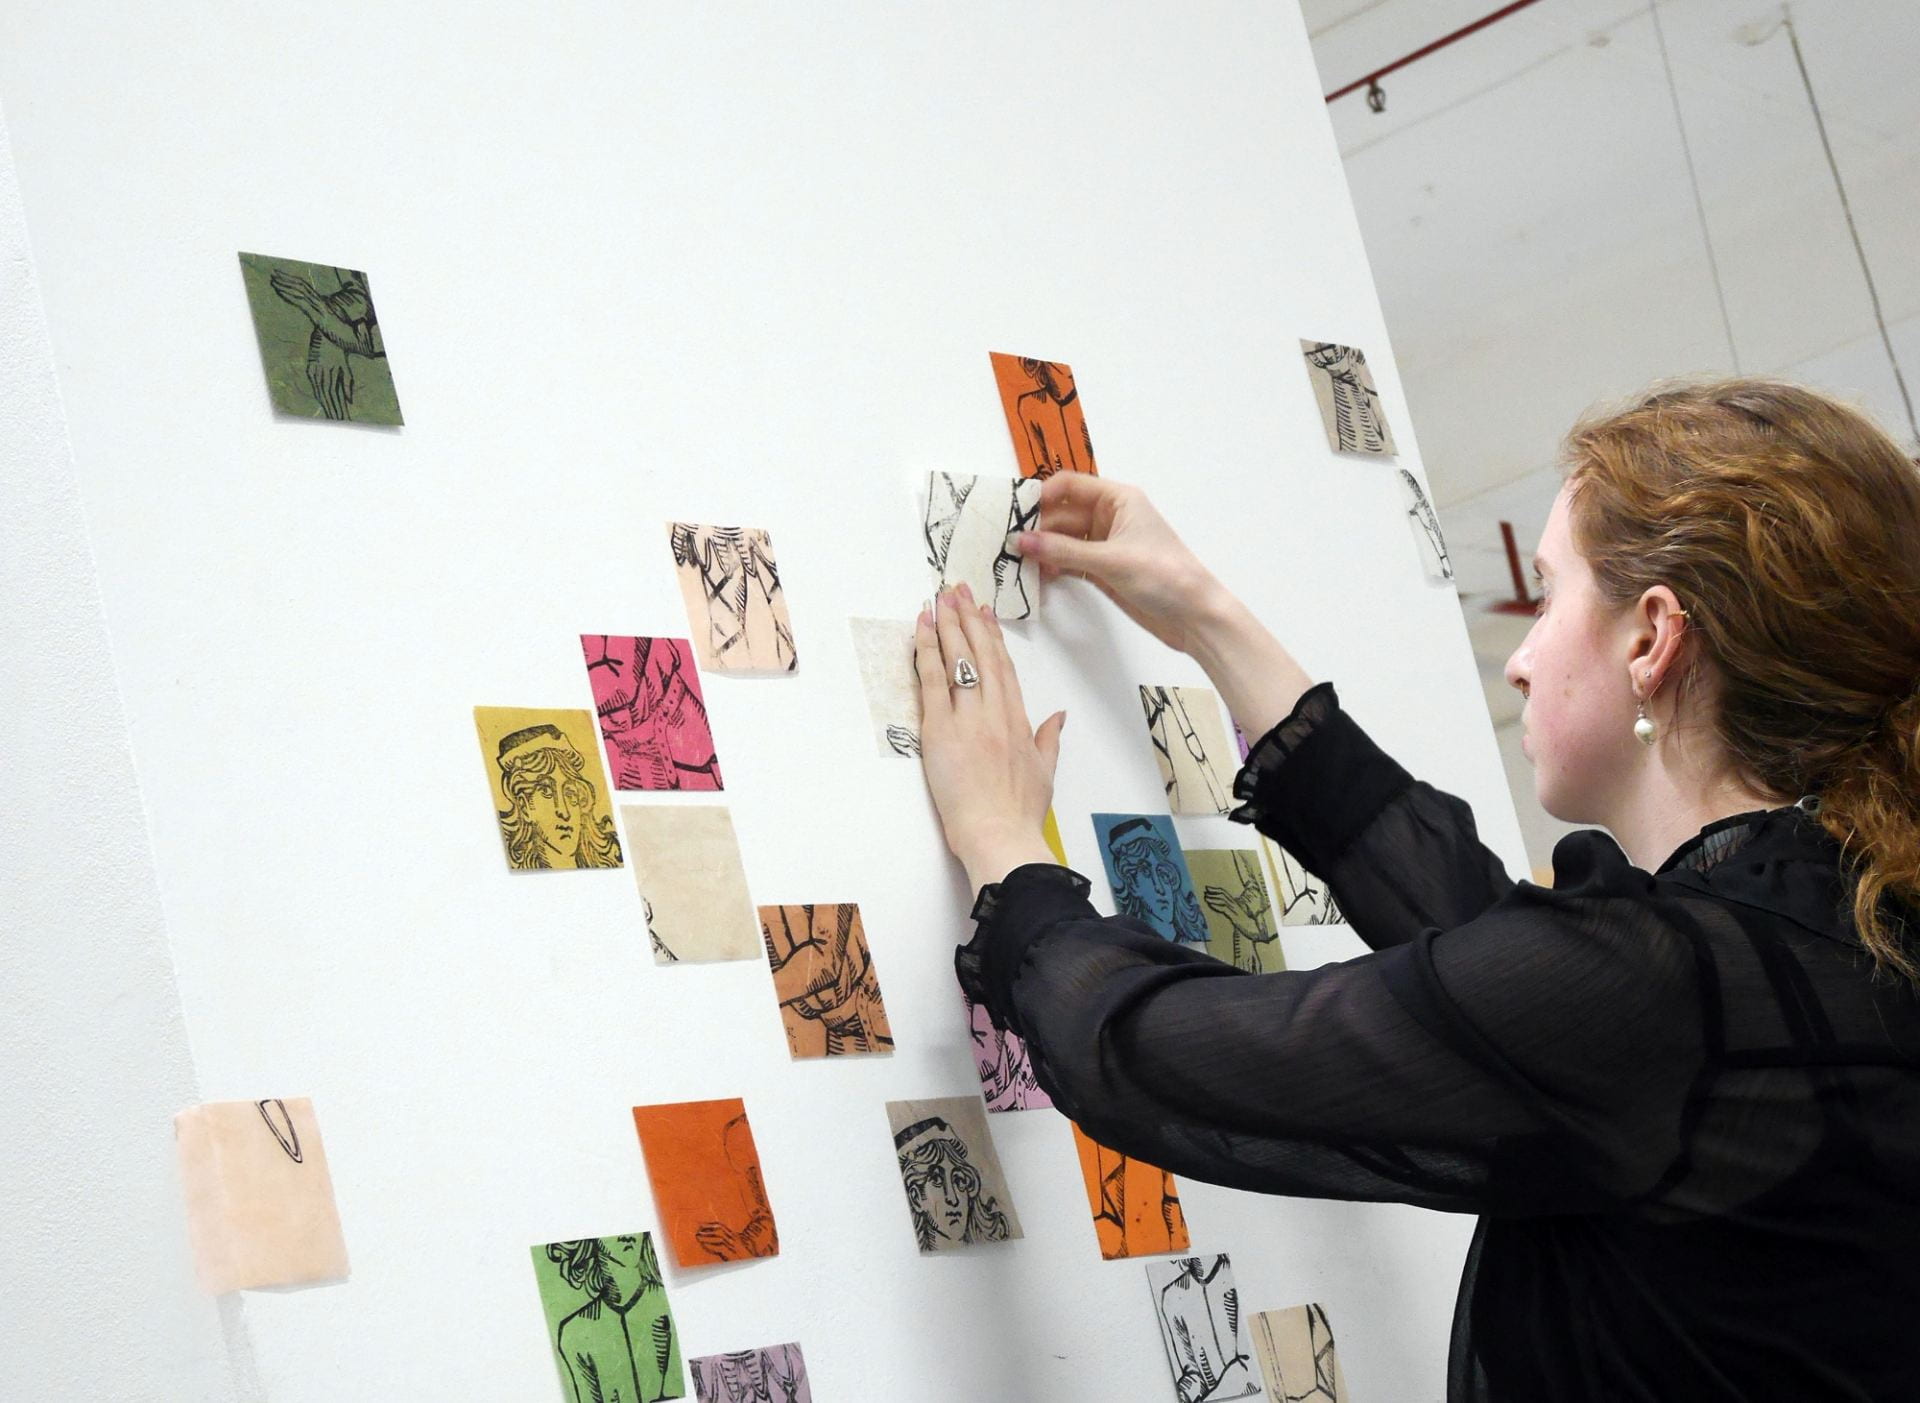 Artist installing various small woodcut prints on a white wall, not unlike a mosaic.